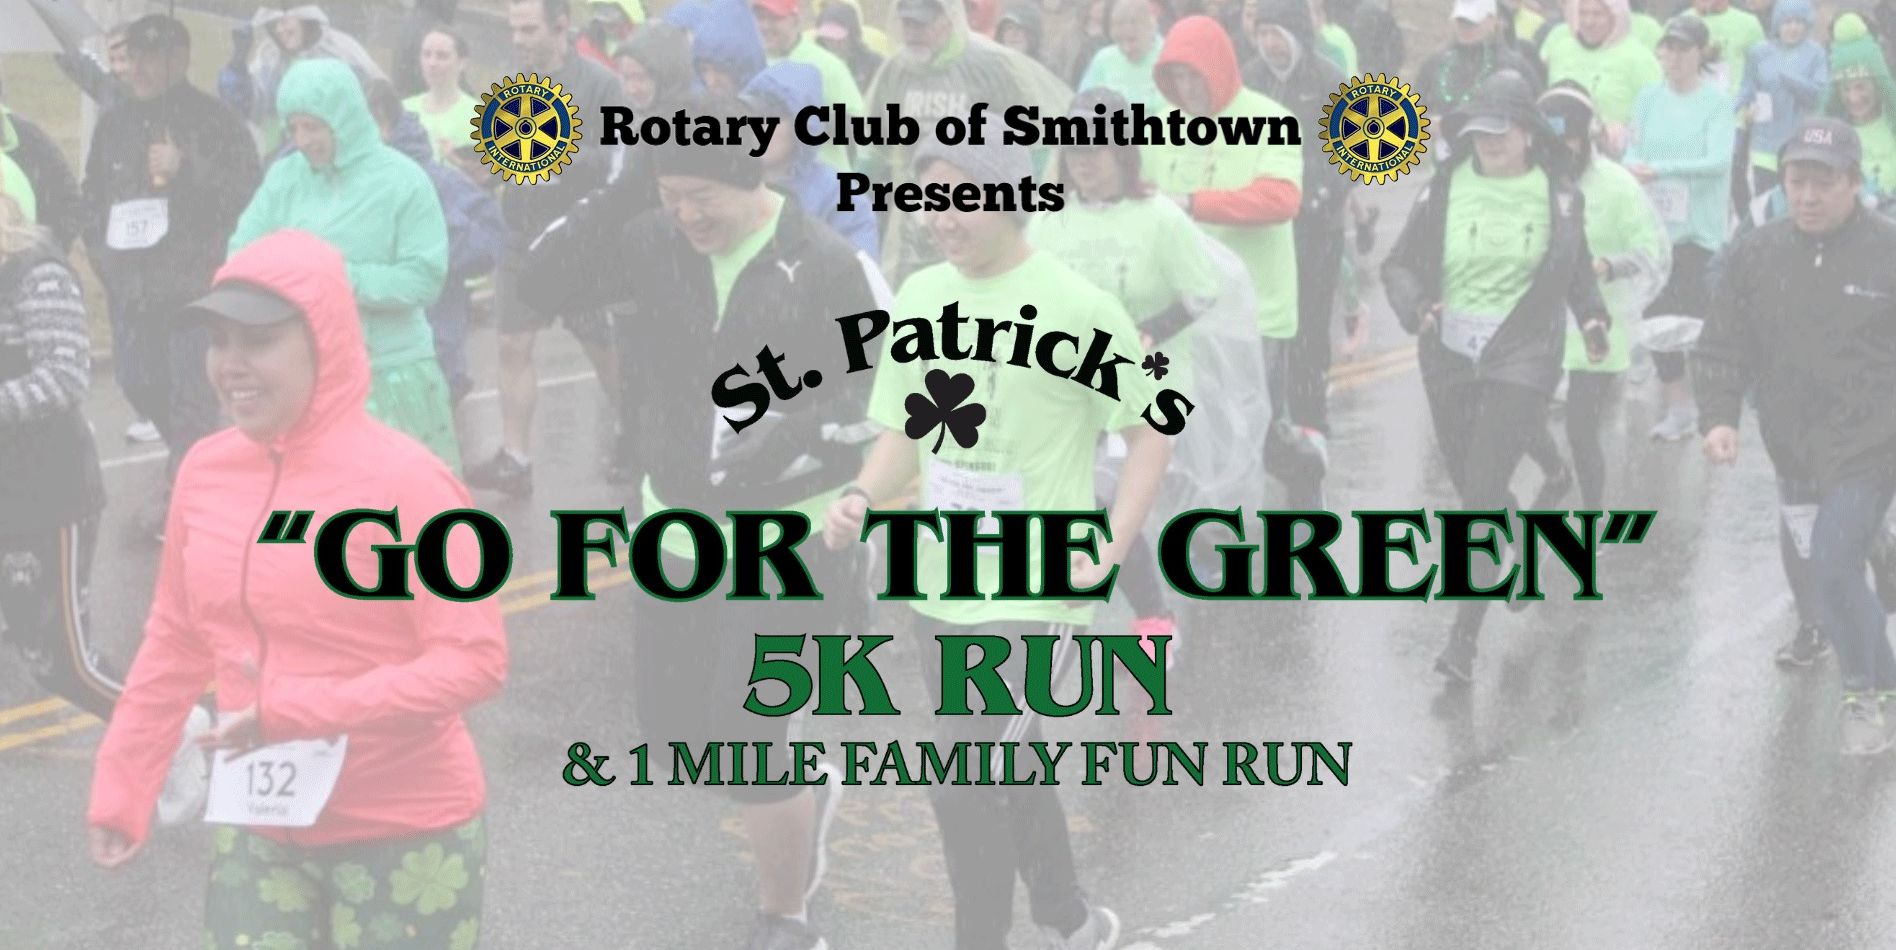 Go for the Green 5K Run/Walk promotional image